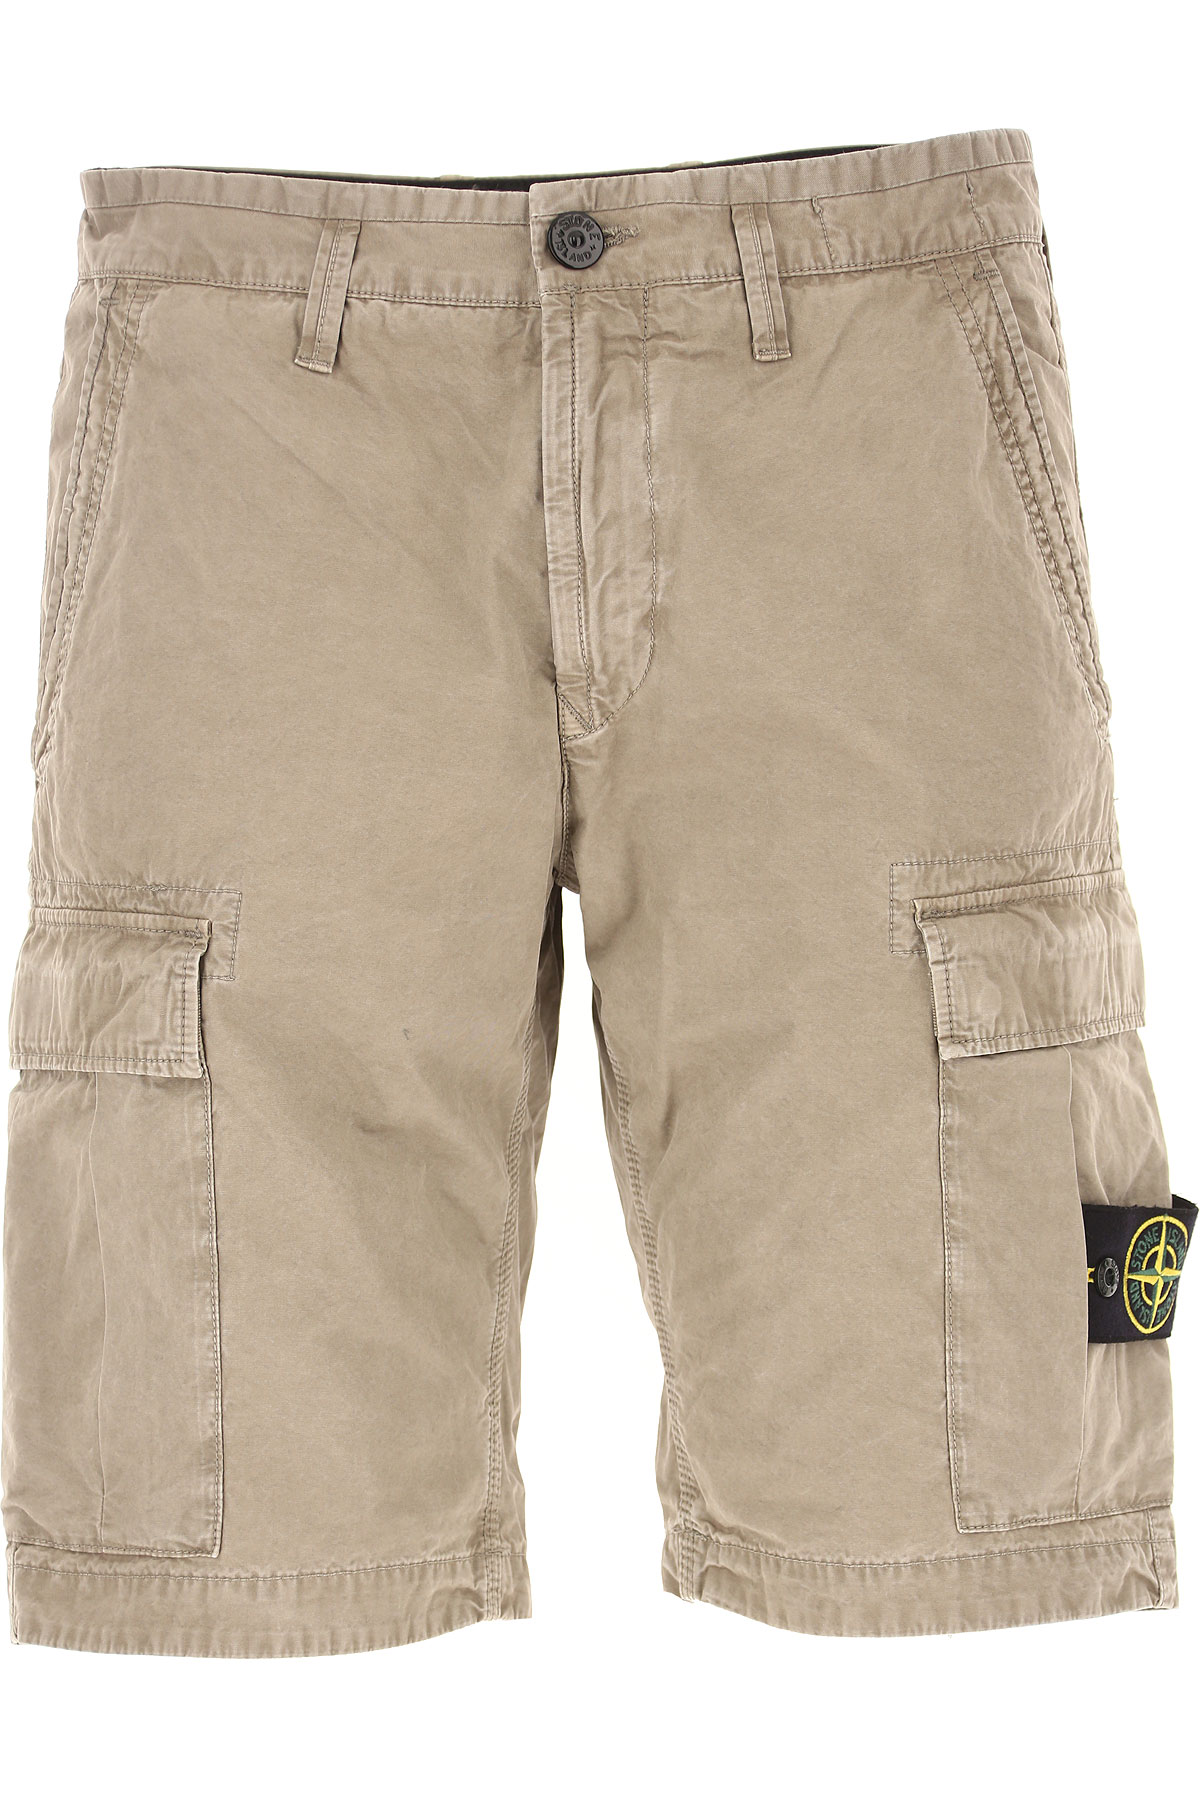 Stone Island Short homme, Tortue, Coton, 2017, 45 46 47 50